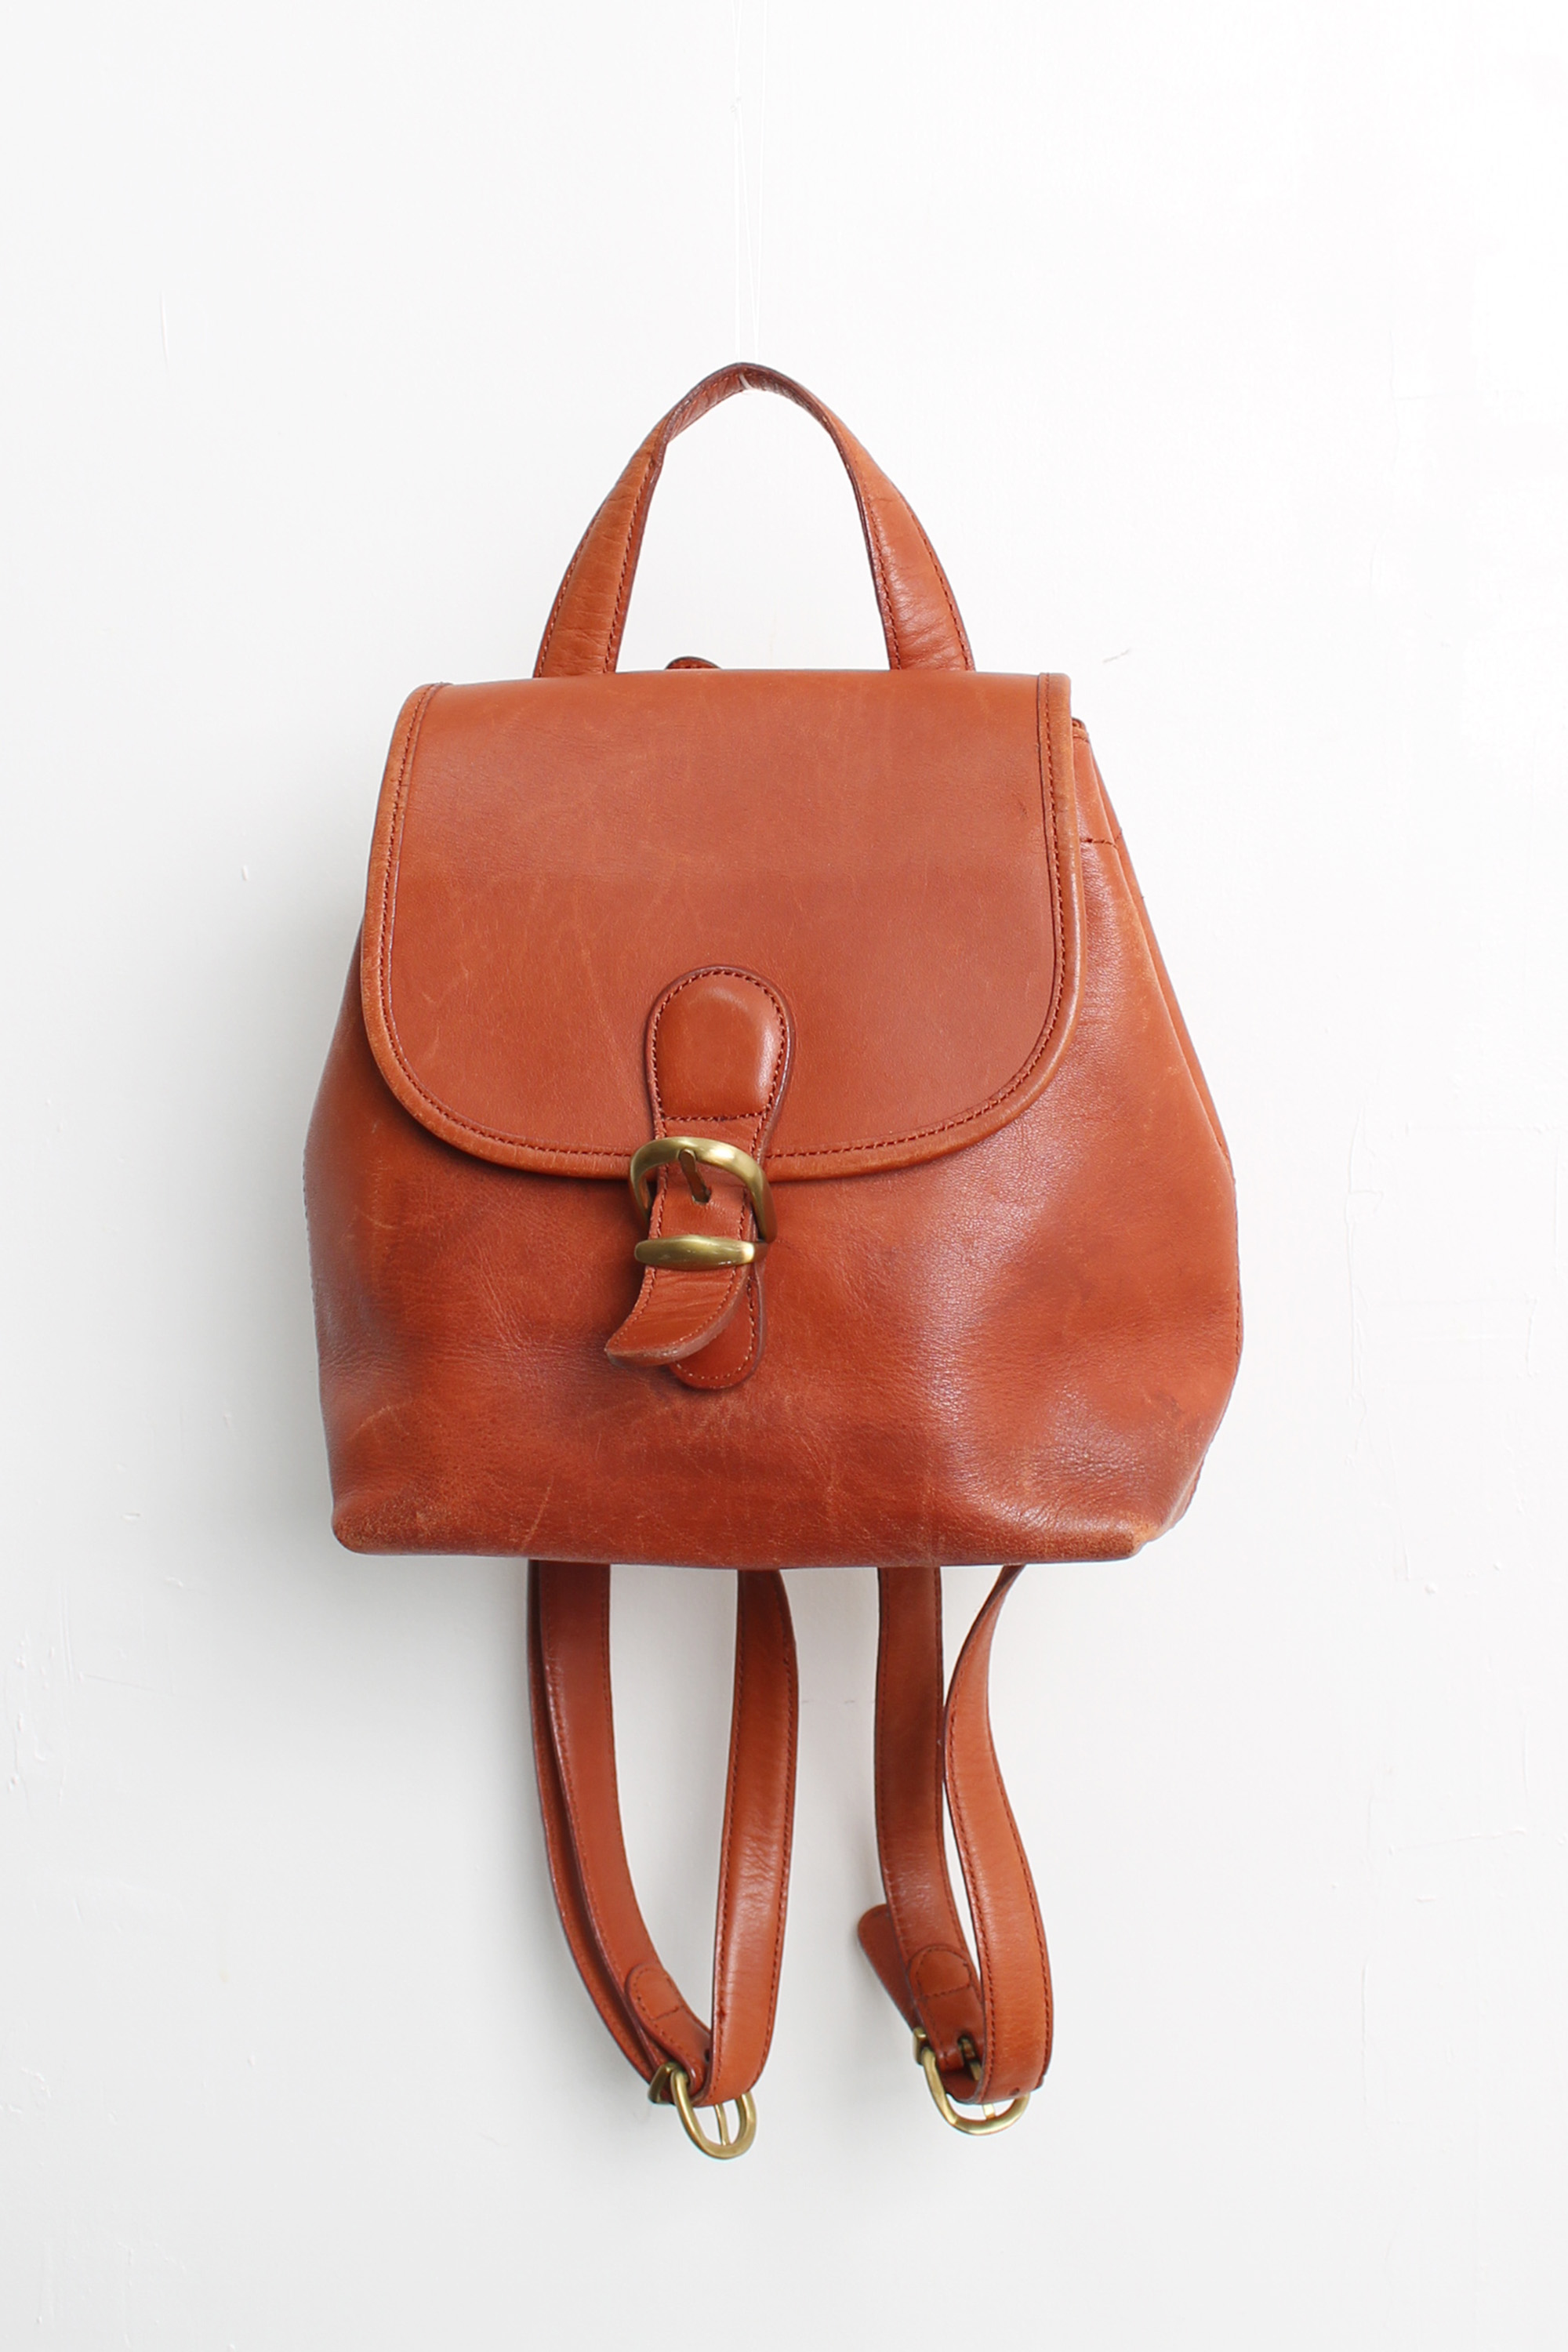 COACH glove tanned leather backpack